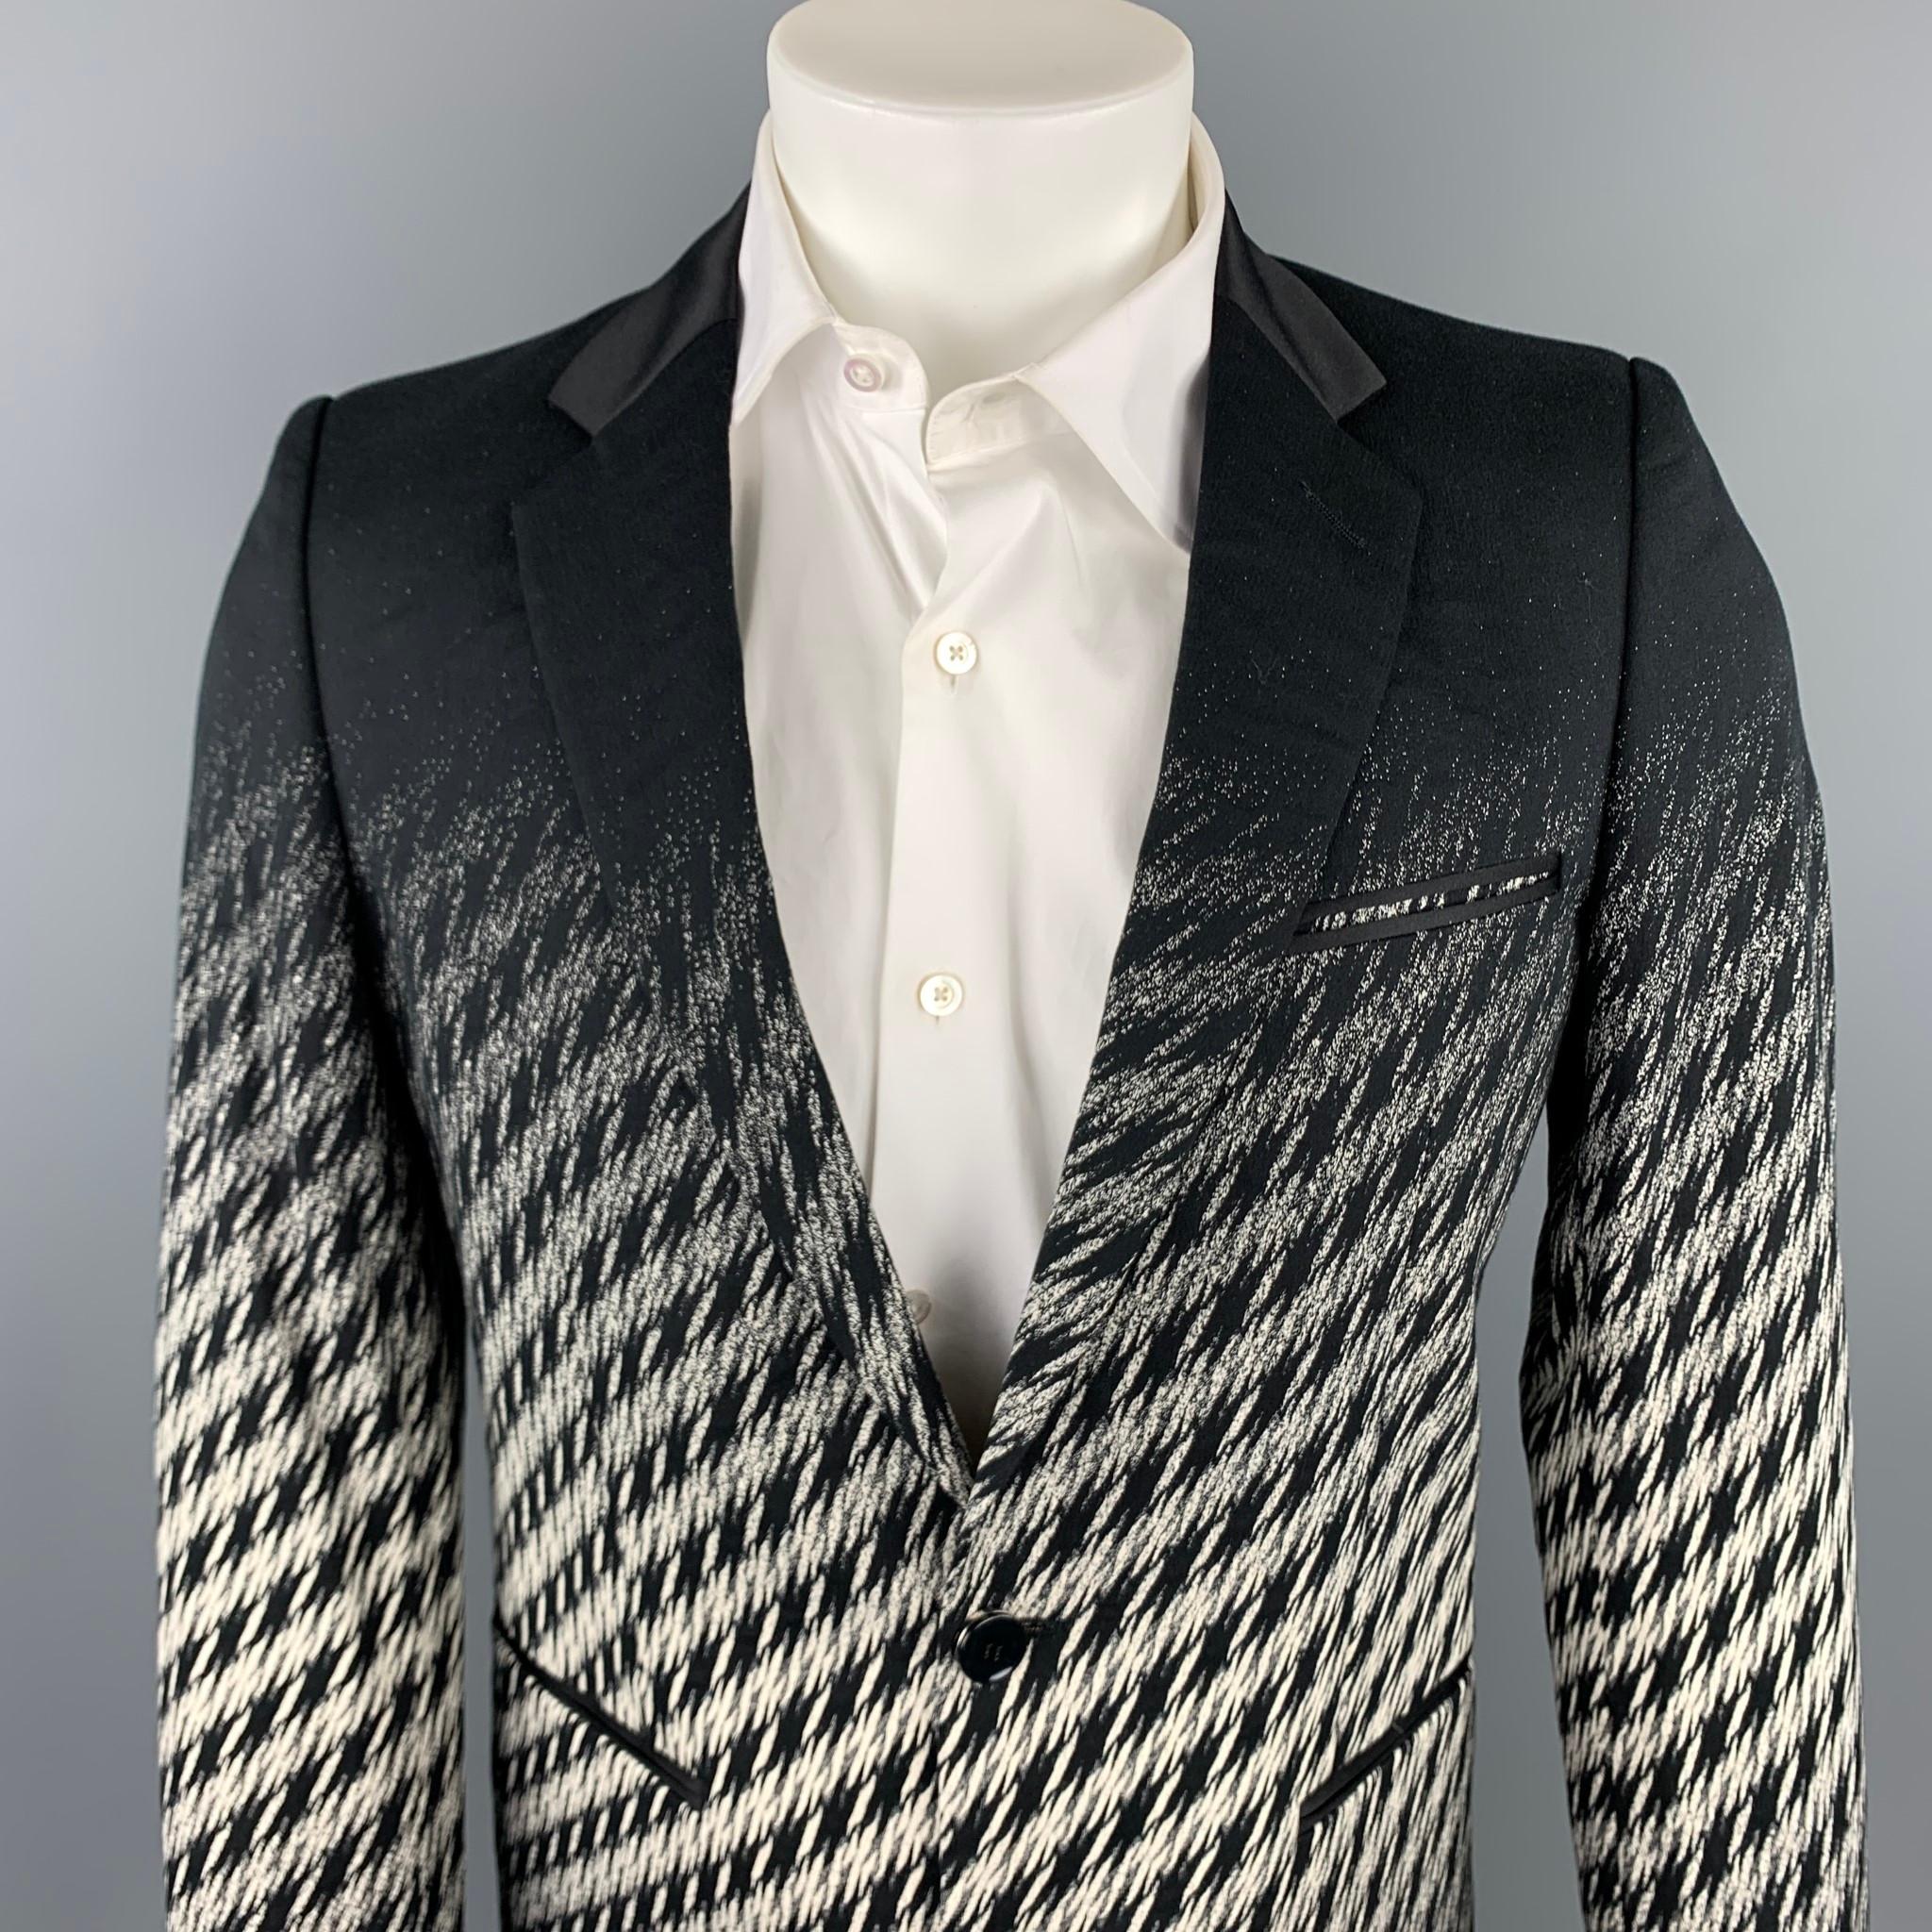 JUST CAVALLI sport coat comes in a black & white houndstooth blend with a full liner featuring a notch lapel, slit pockets, and a two button closure. Made in Italy.

Very Good Pre-Owned Condition.
Marked: IT 48

Measurements:

Shoulder: 16.5